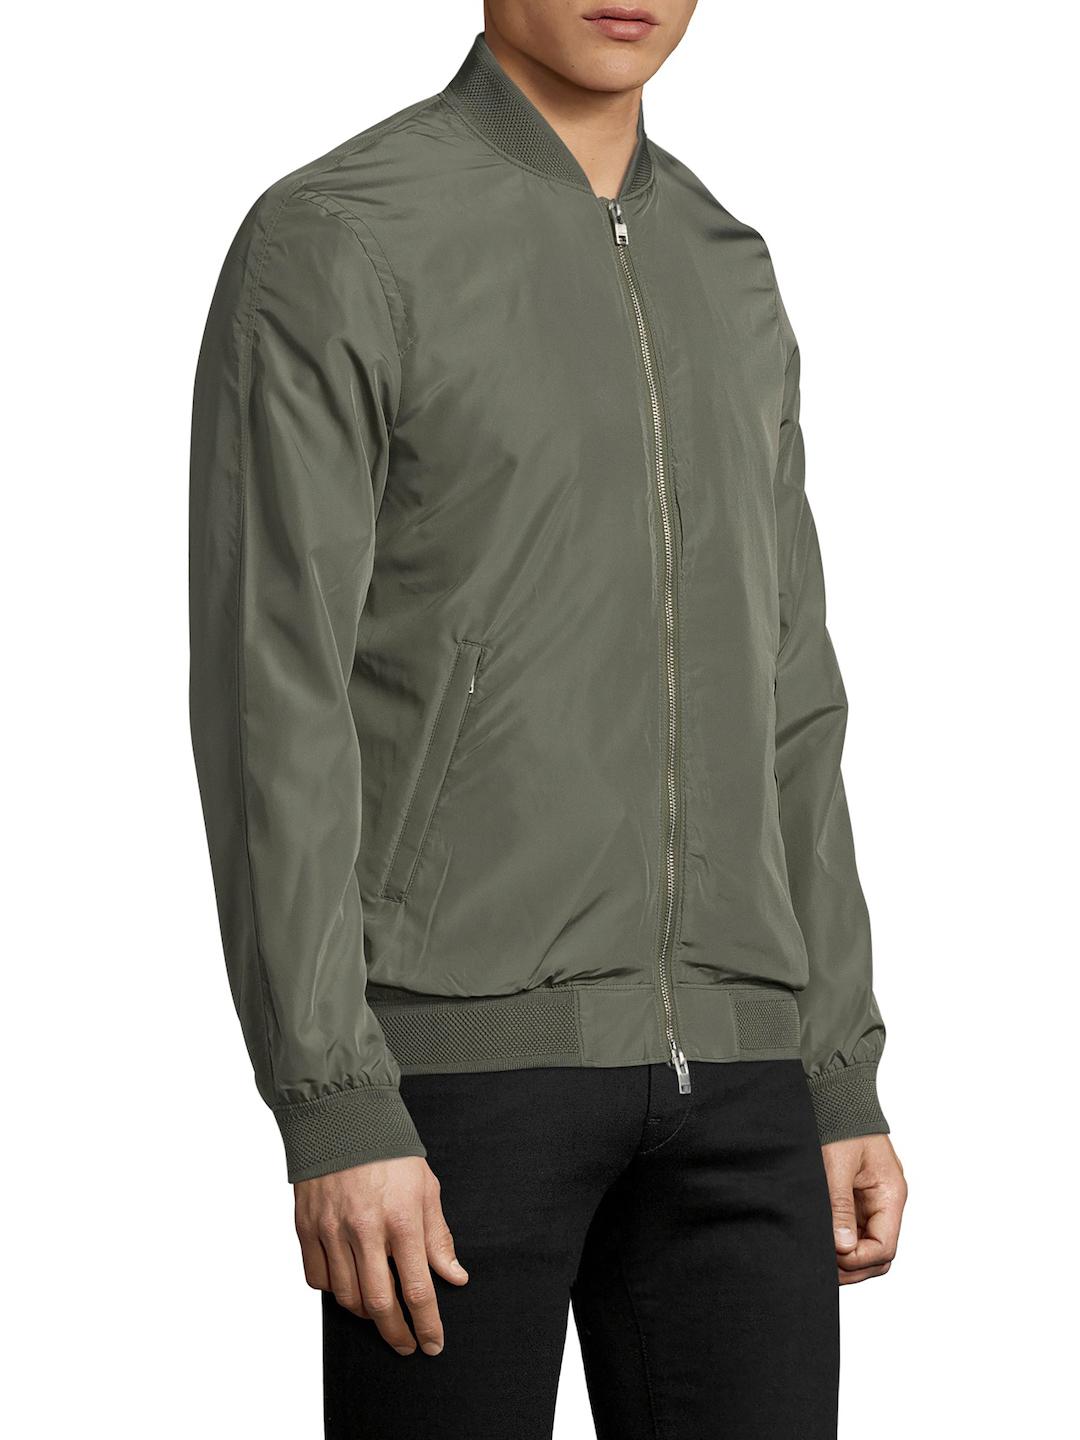 J.Lindeberg Synthetic Thom 72 Gravity Bomber Jacket in Military Green  (Green) for Men | Lyst